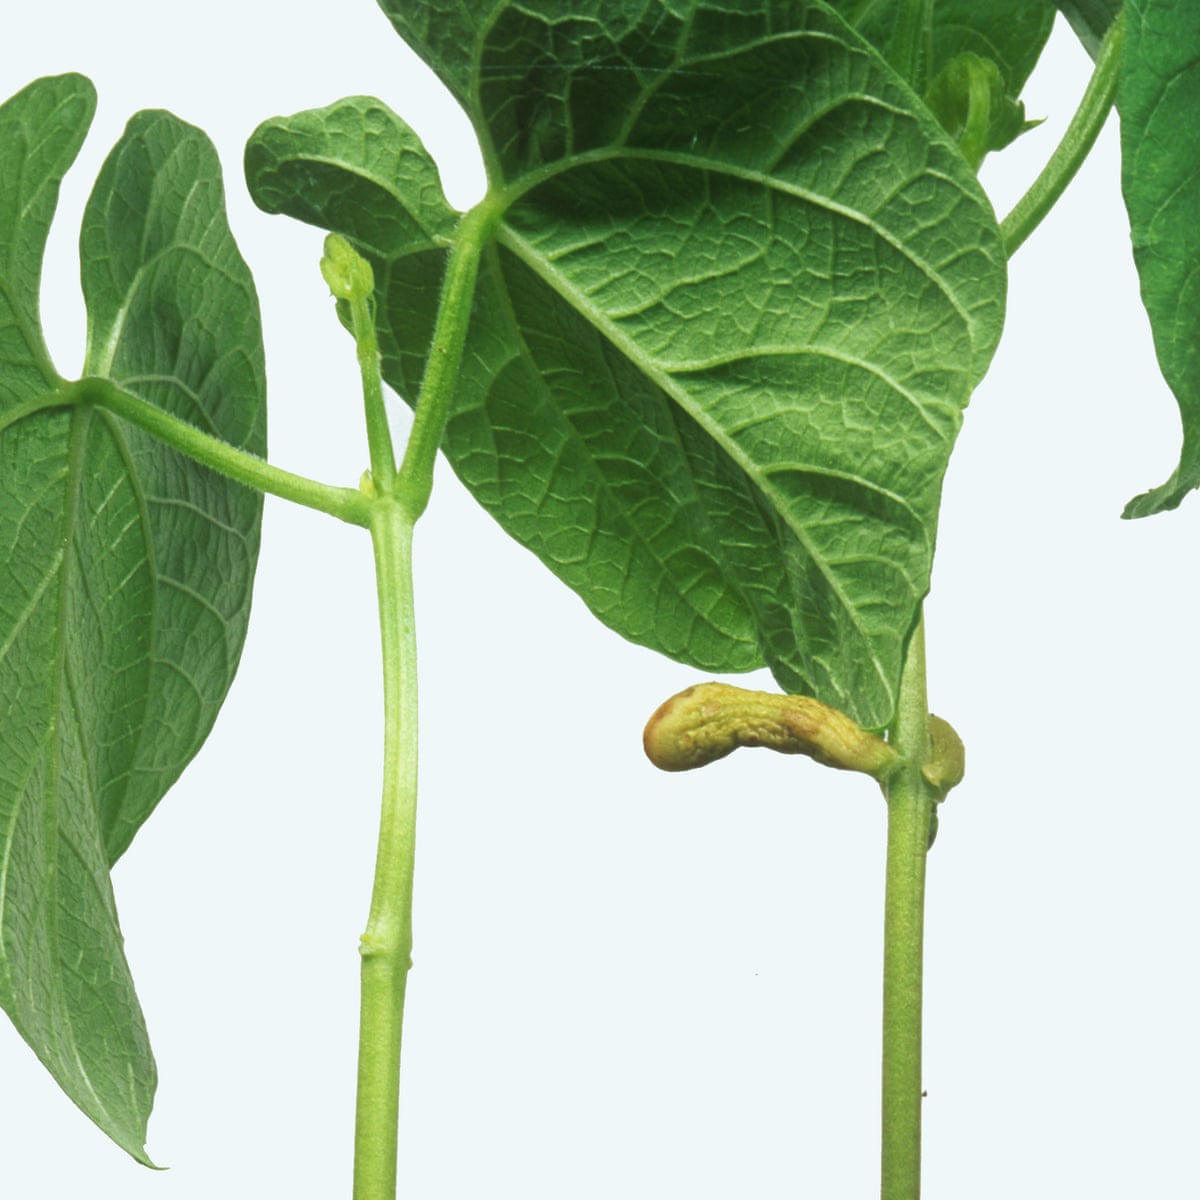 Food for thought French bean plants show signs of intent, say ...